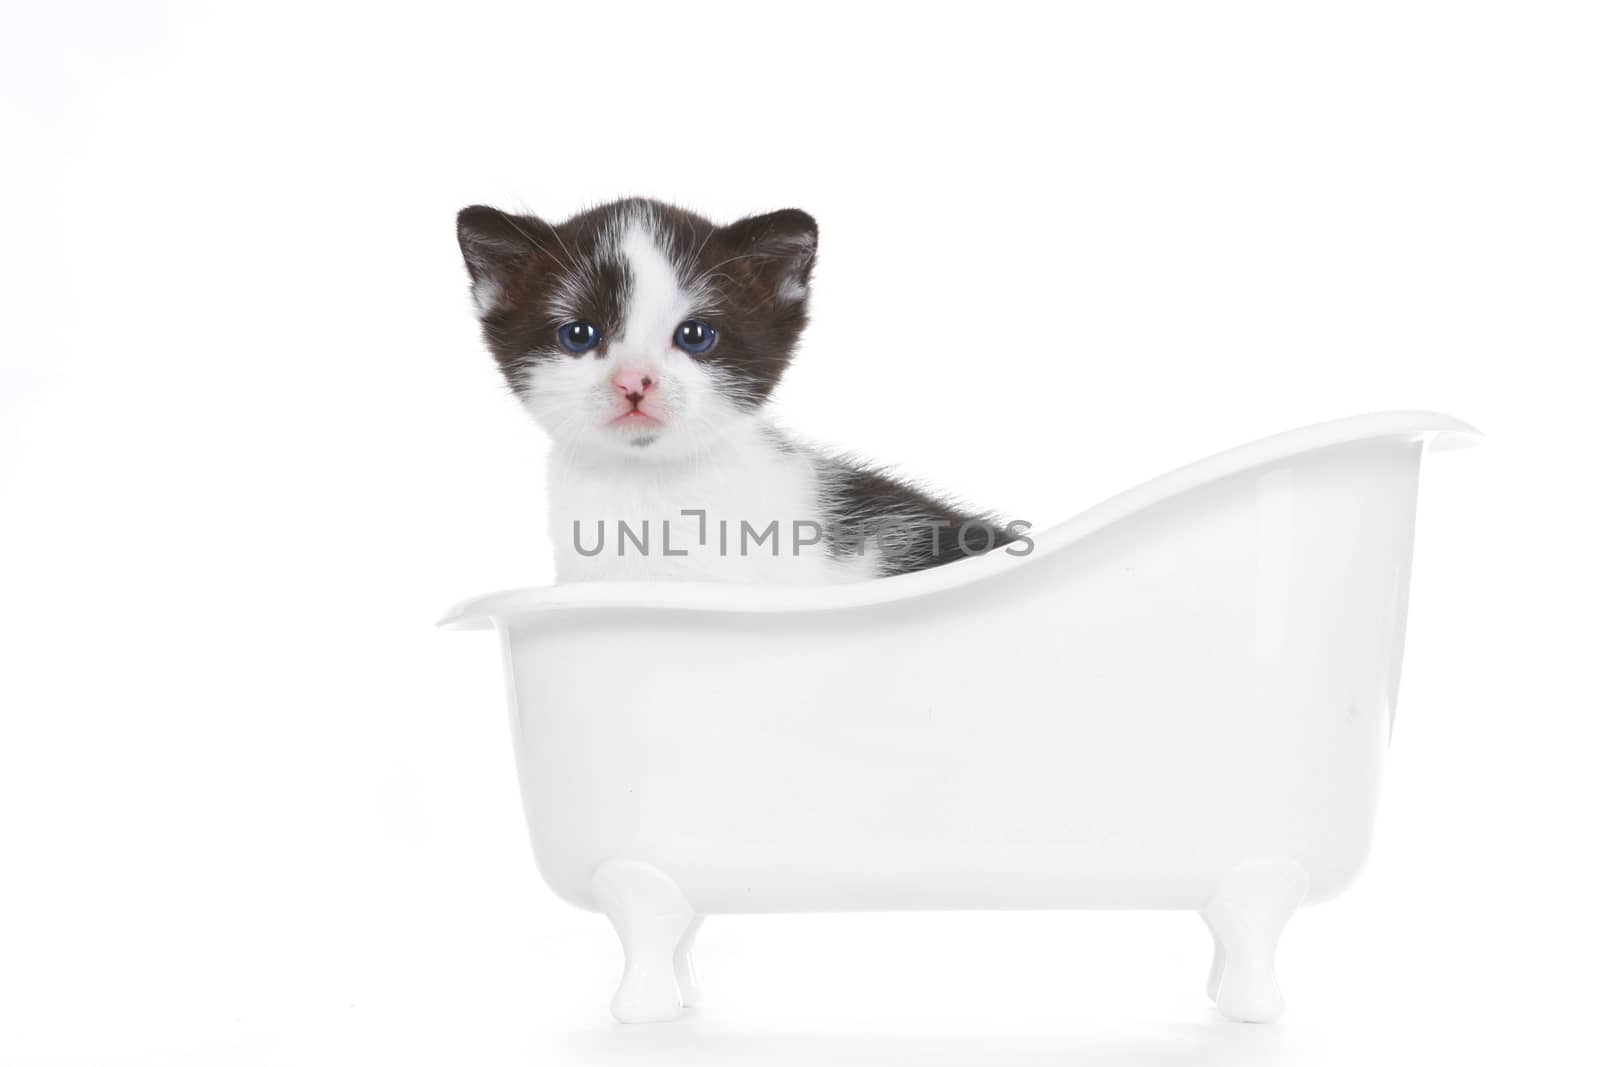 Sweet Kitten on White Background Looking Adorable by tobkatrina